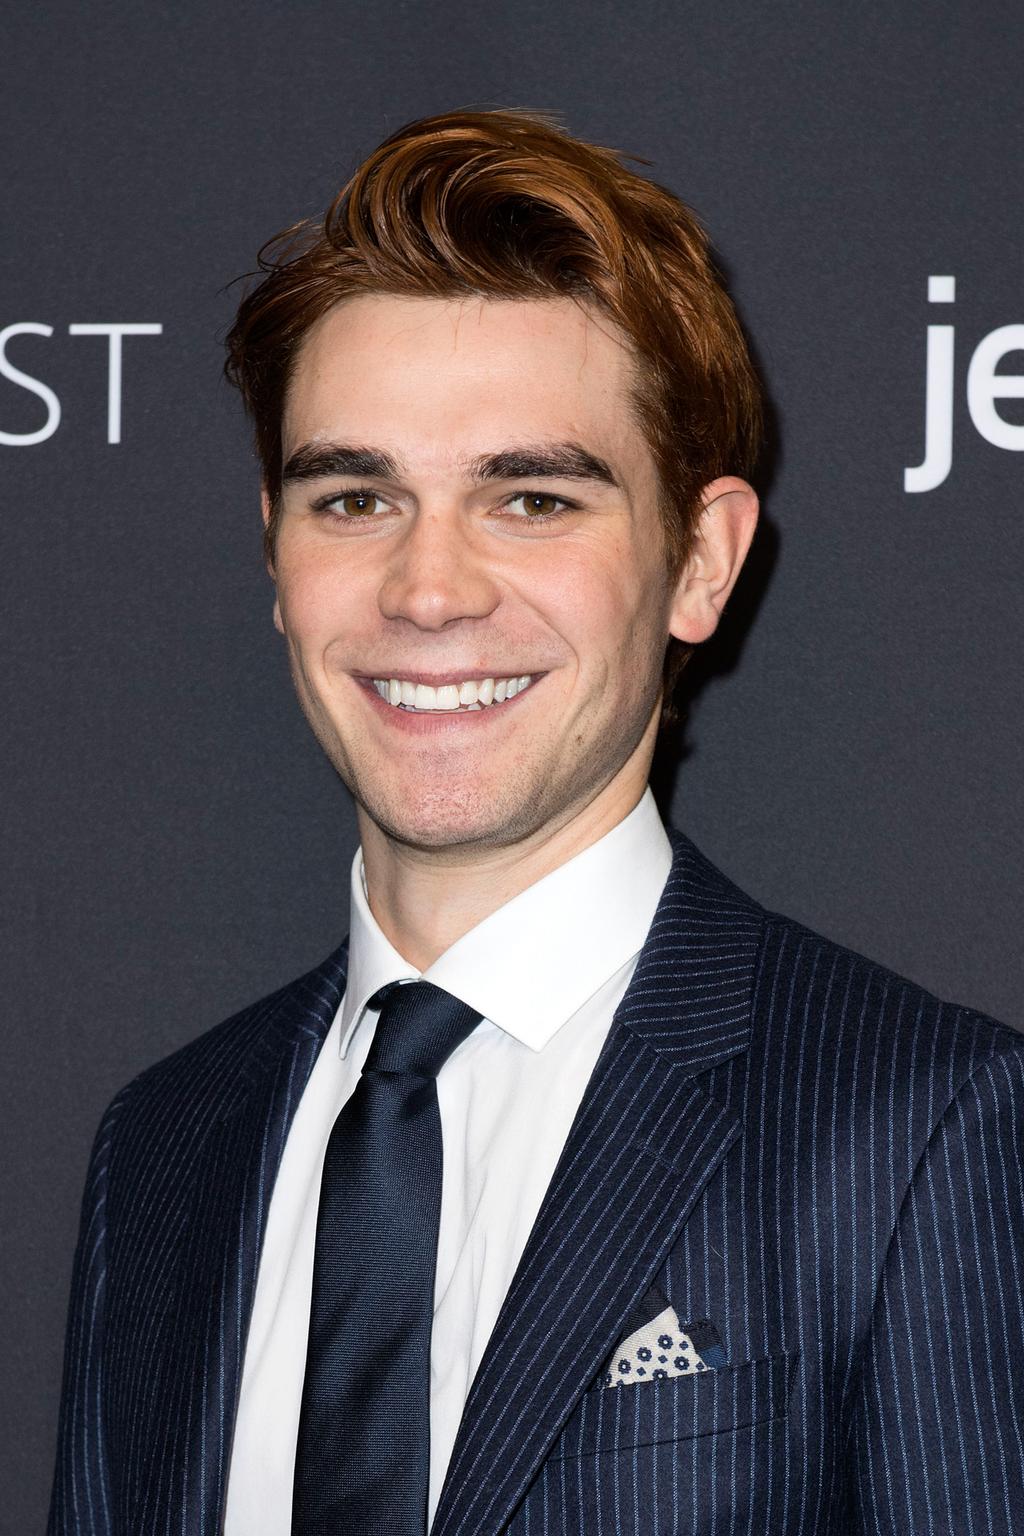 Kj Apa Cast In The Hate U Give Inspired By The Black Lives Matter